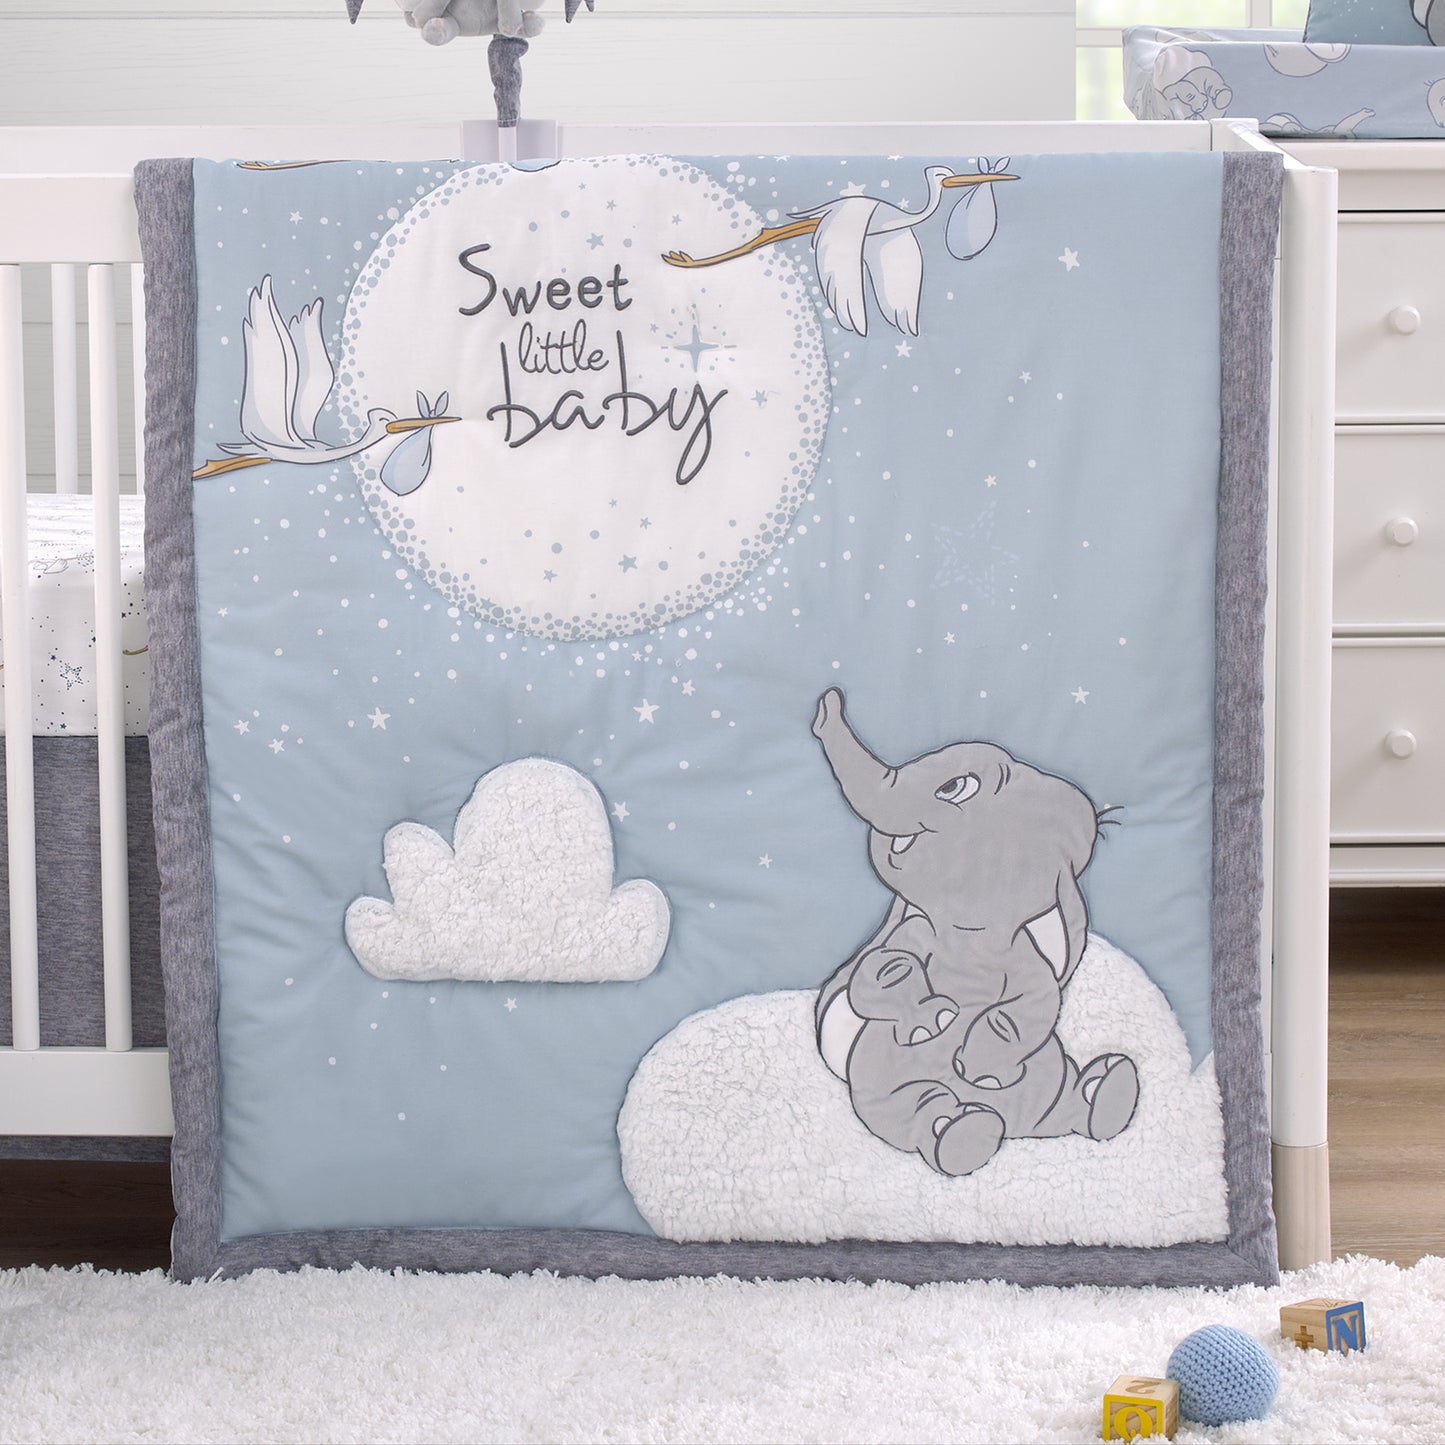 Disney Dumbo Sweet Little Baby Light Blue, Gray, and White Storks, Stars, Clouds and Moon 3 Piece Nursery Crib Bedding Set - Comforter, 100% Cotton Fitted Crib Sheet and Crib Skirt